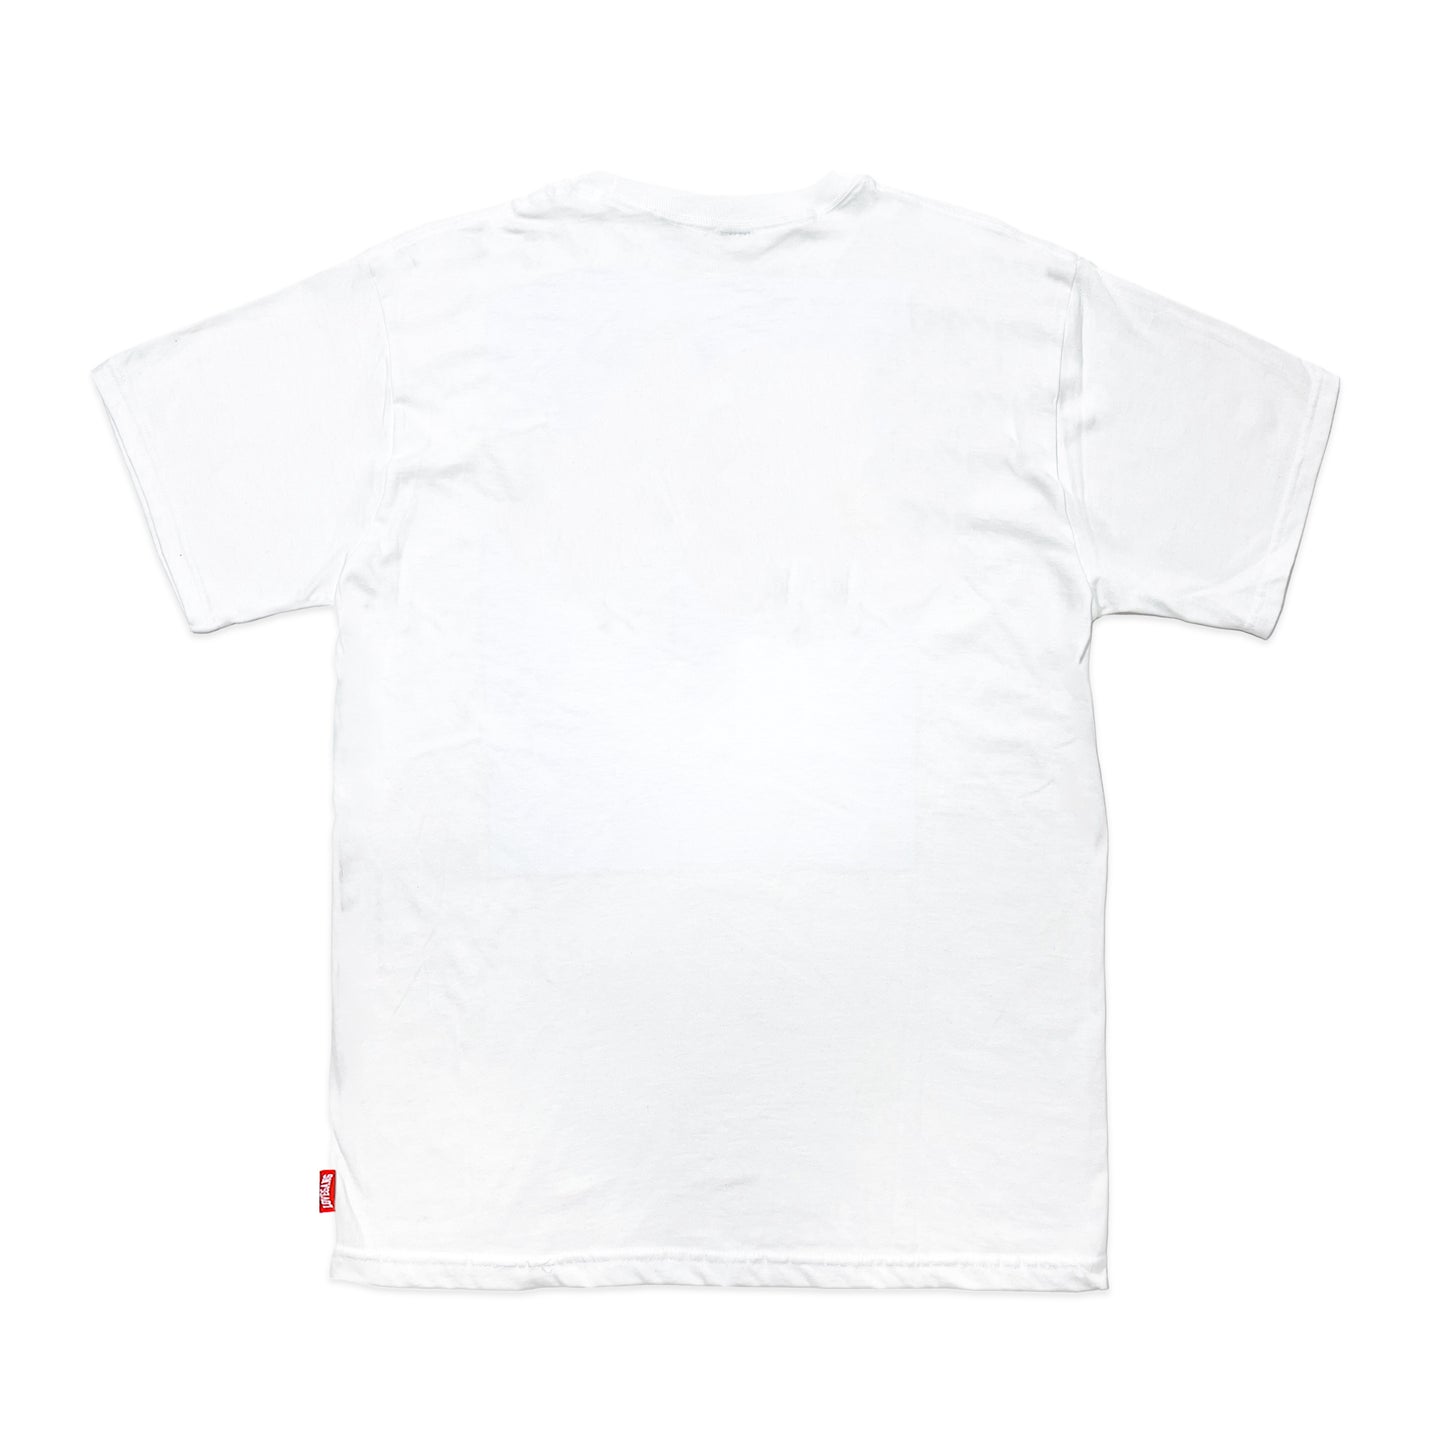 COLLEGE S/S '21 - T-SHIRT (WH)